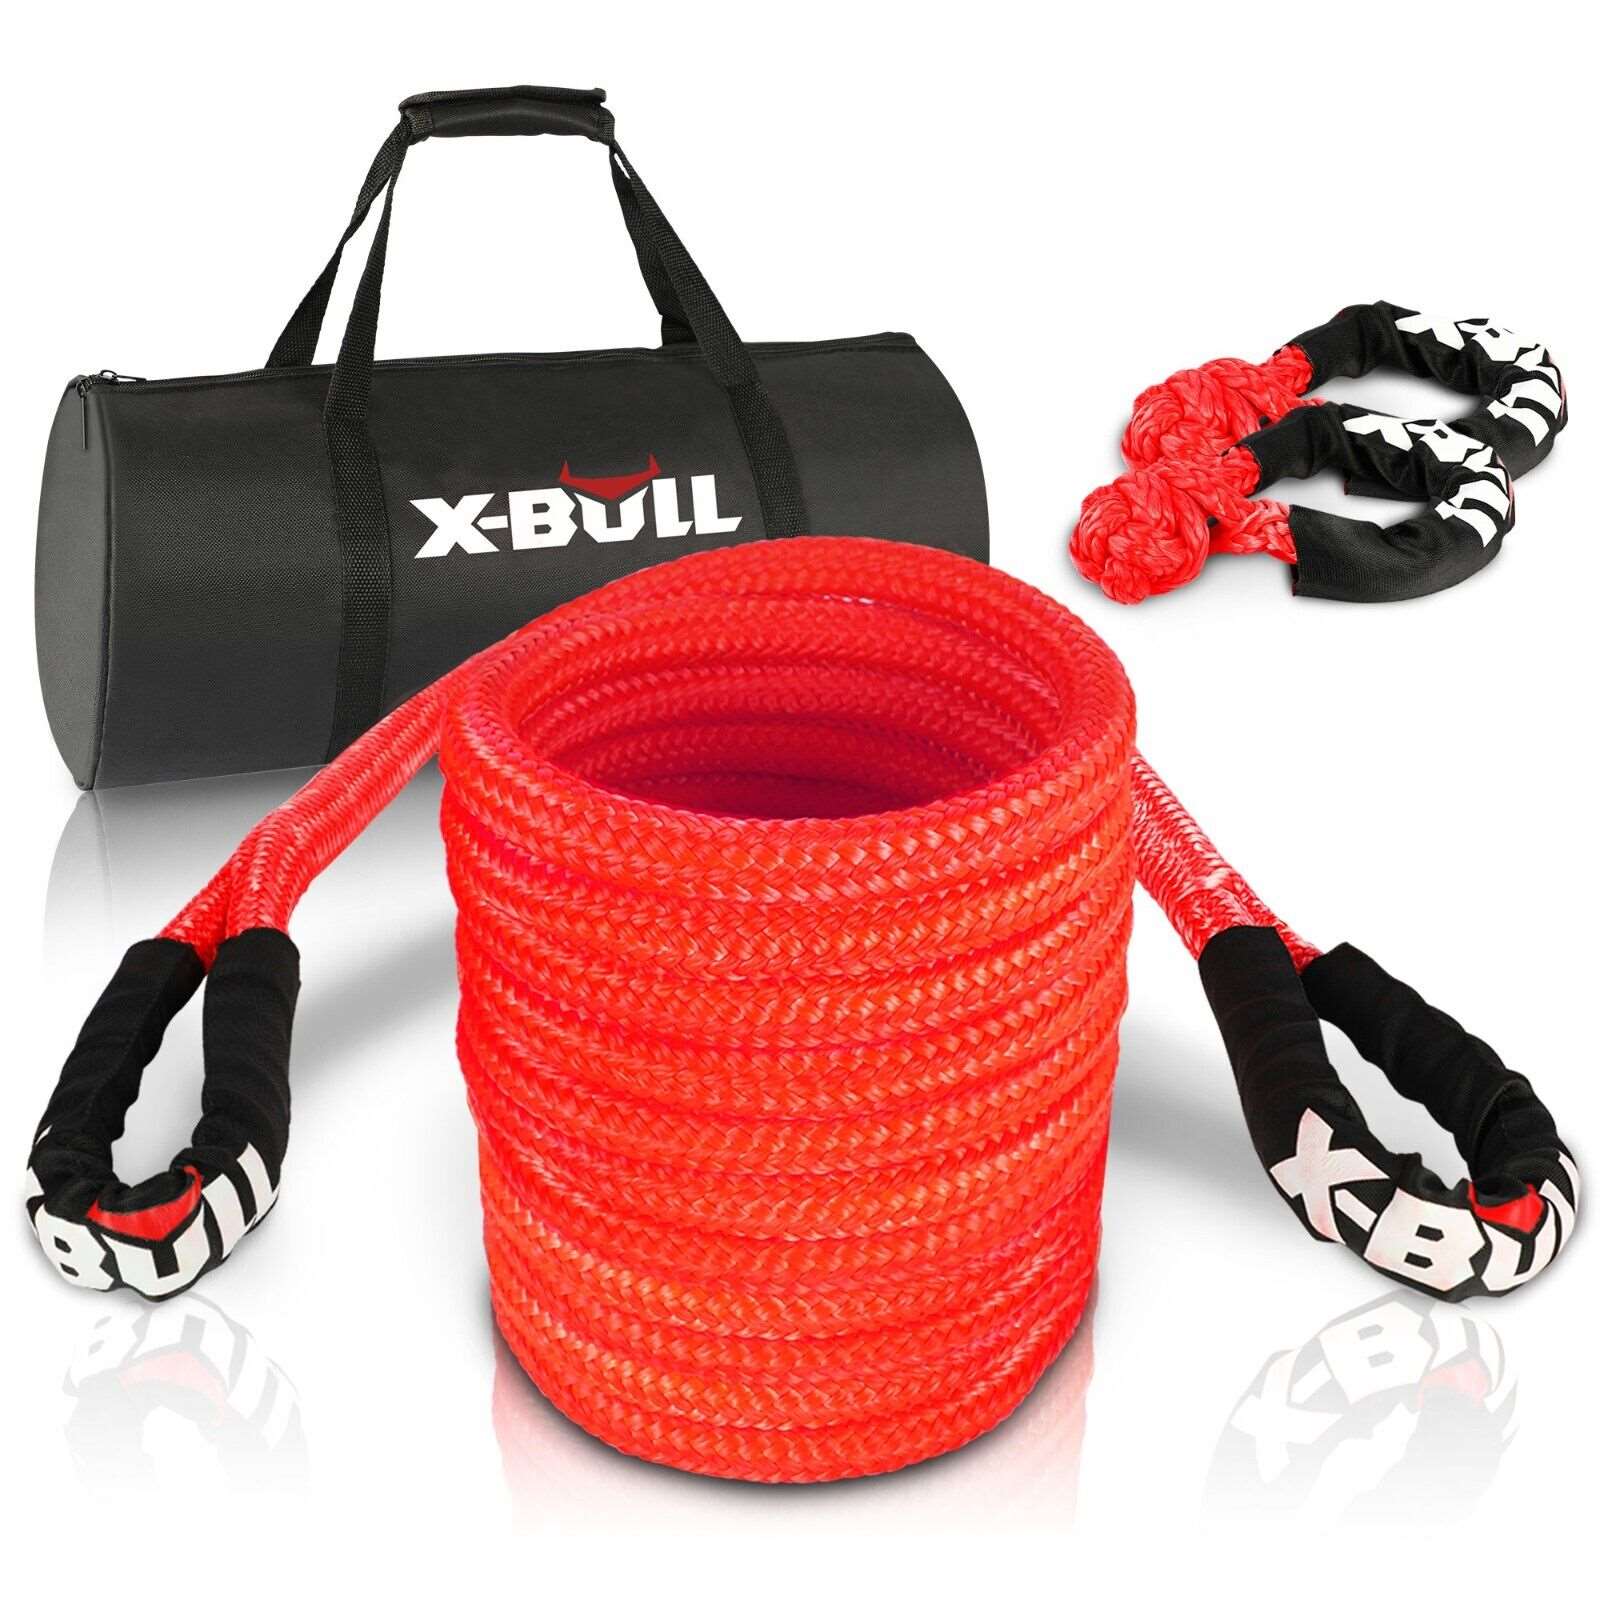 Kinetic Rope Snatch Strap Recovery Kit Dyneema Tow Winch - Pmboutdoor